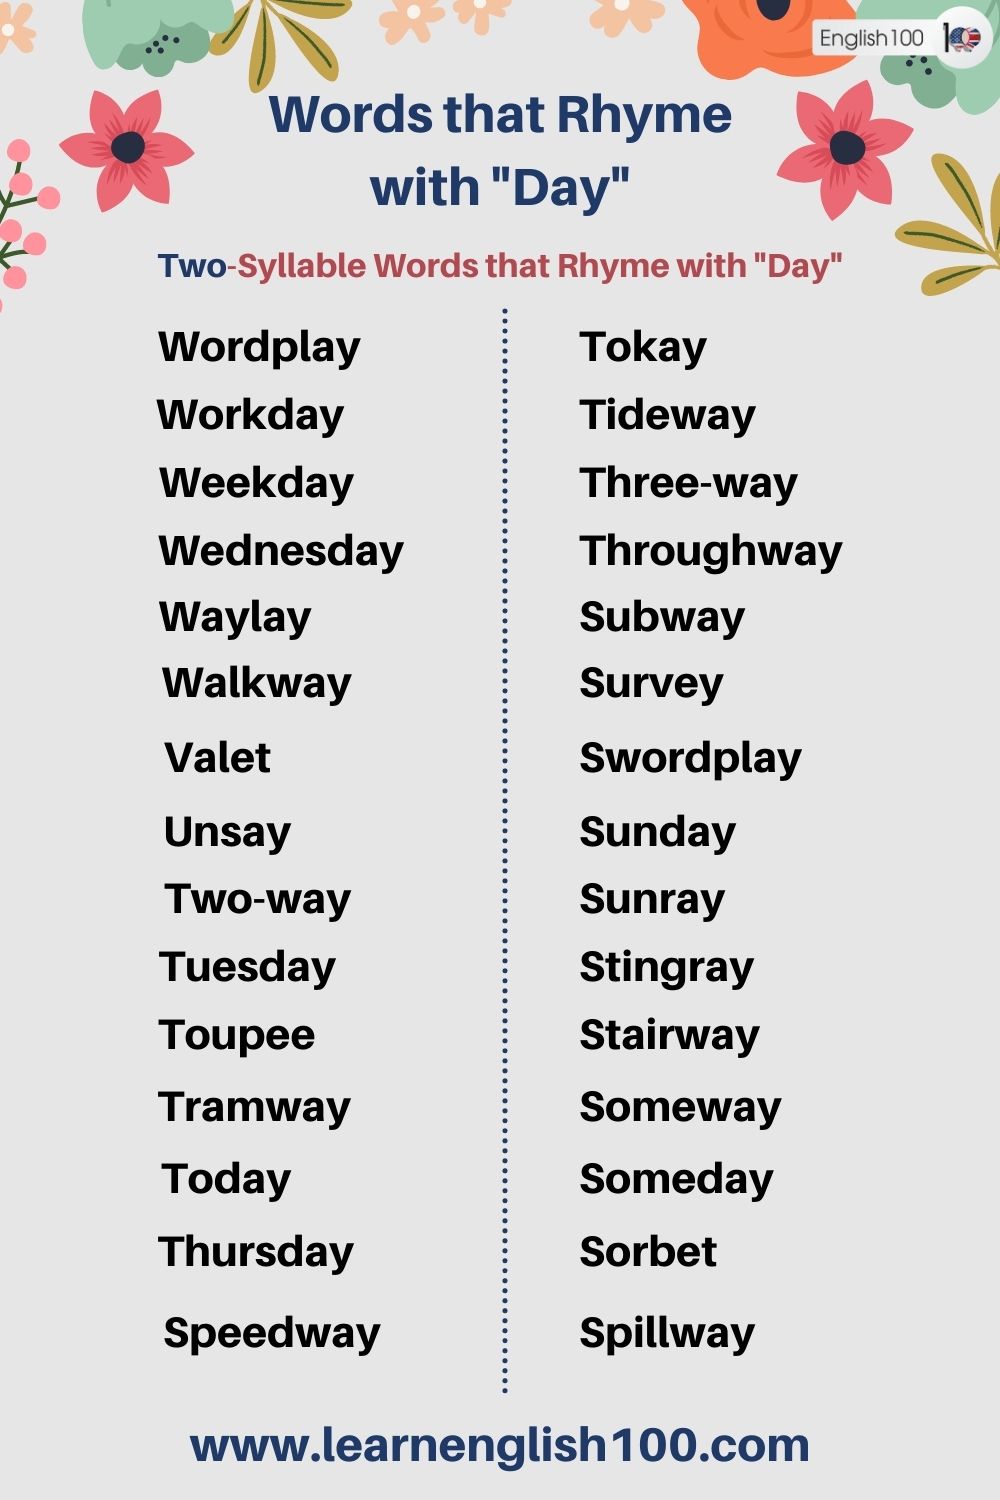  Words that Rhyme with "Love" / "Day"